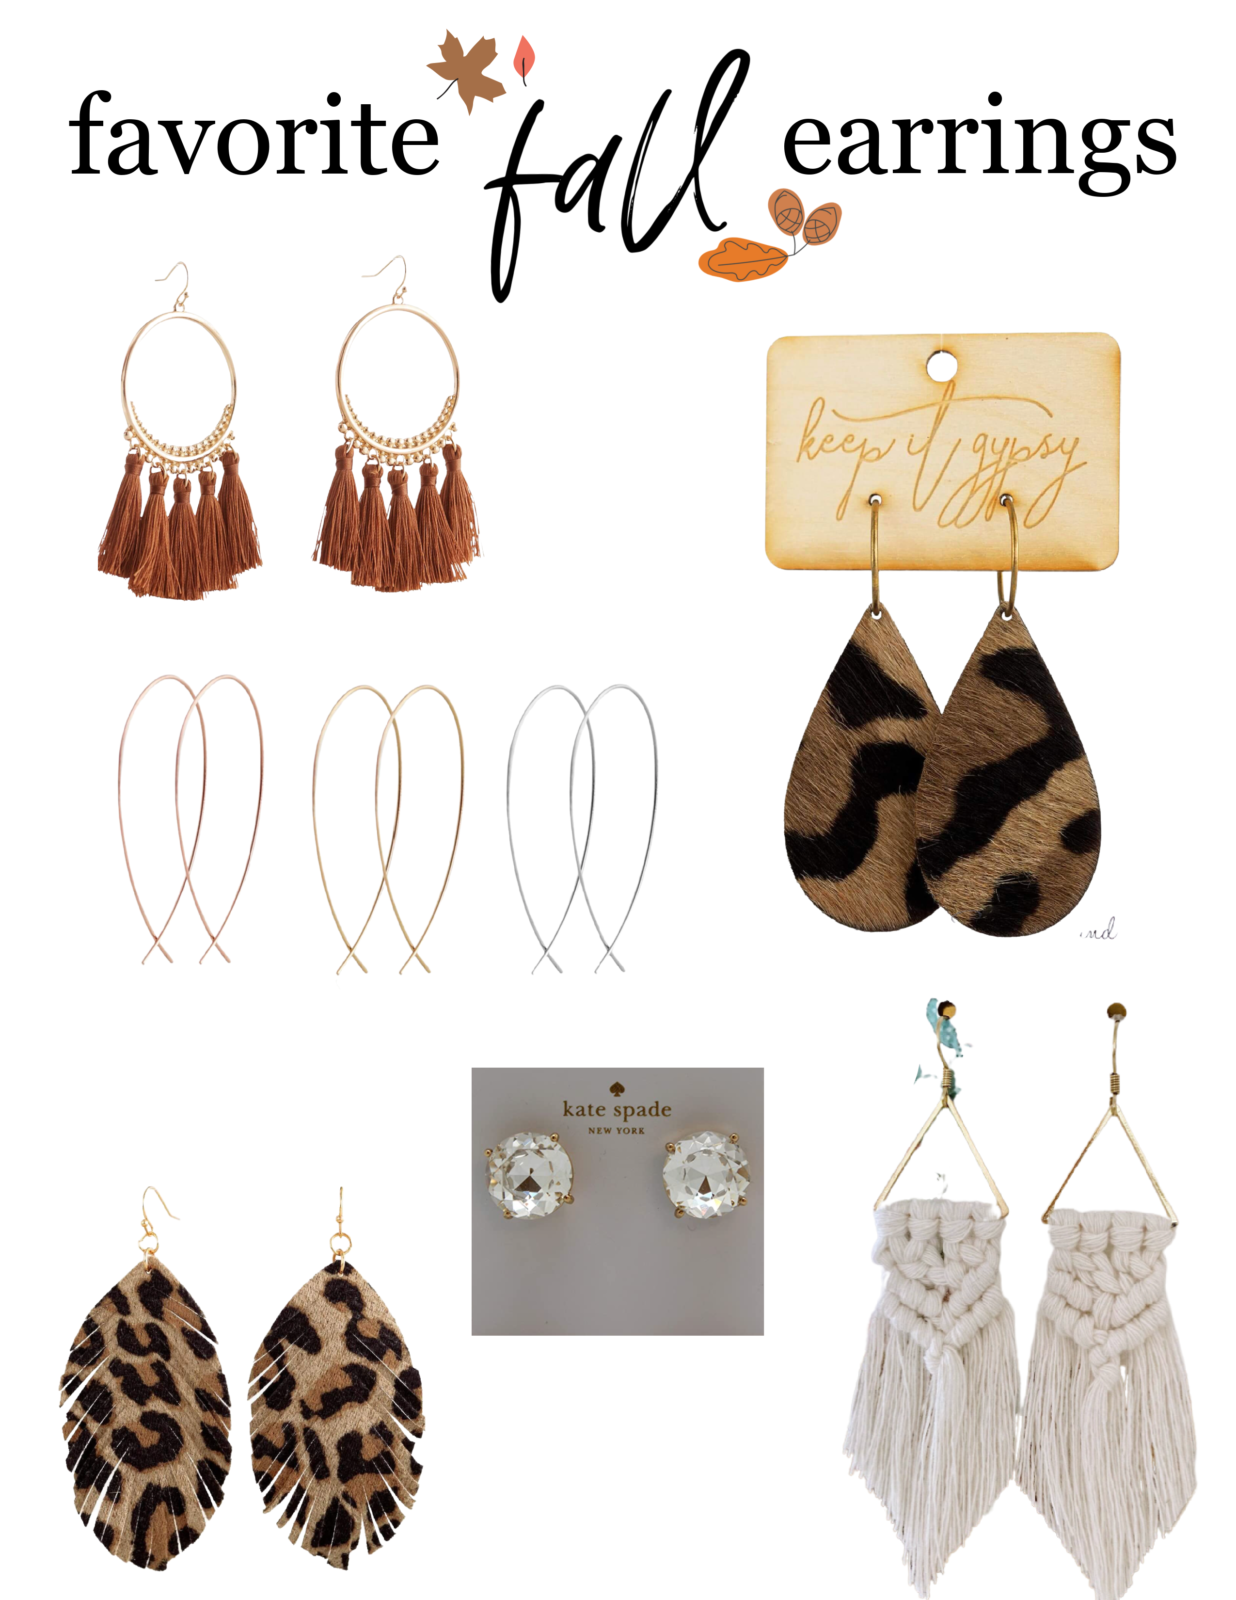 Favorite Fall Earrings & Fall Products for Home & Fashion Krista Gilbert